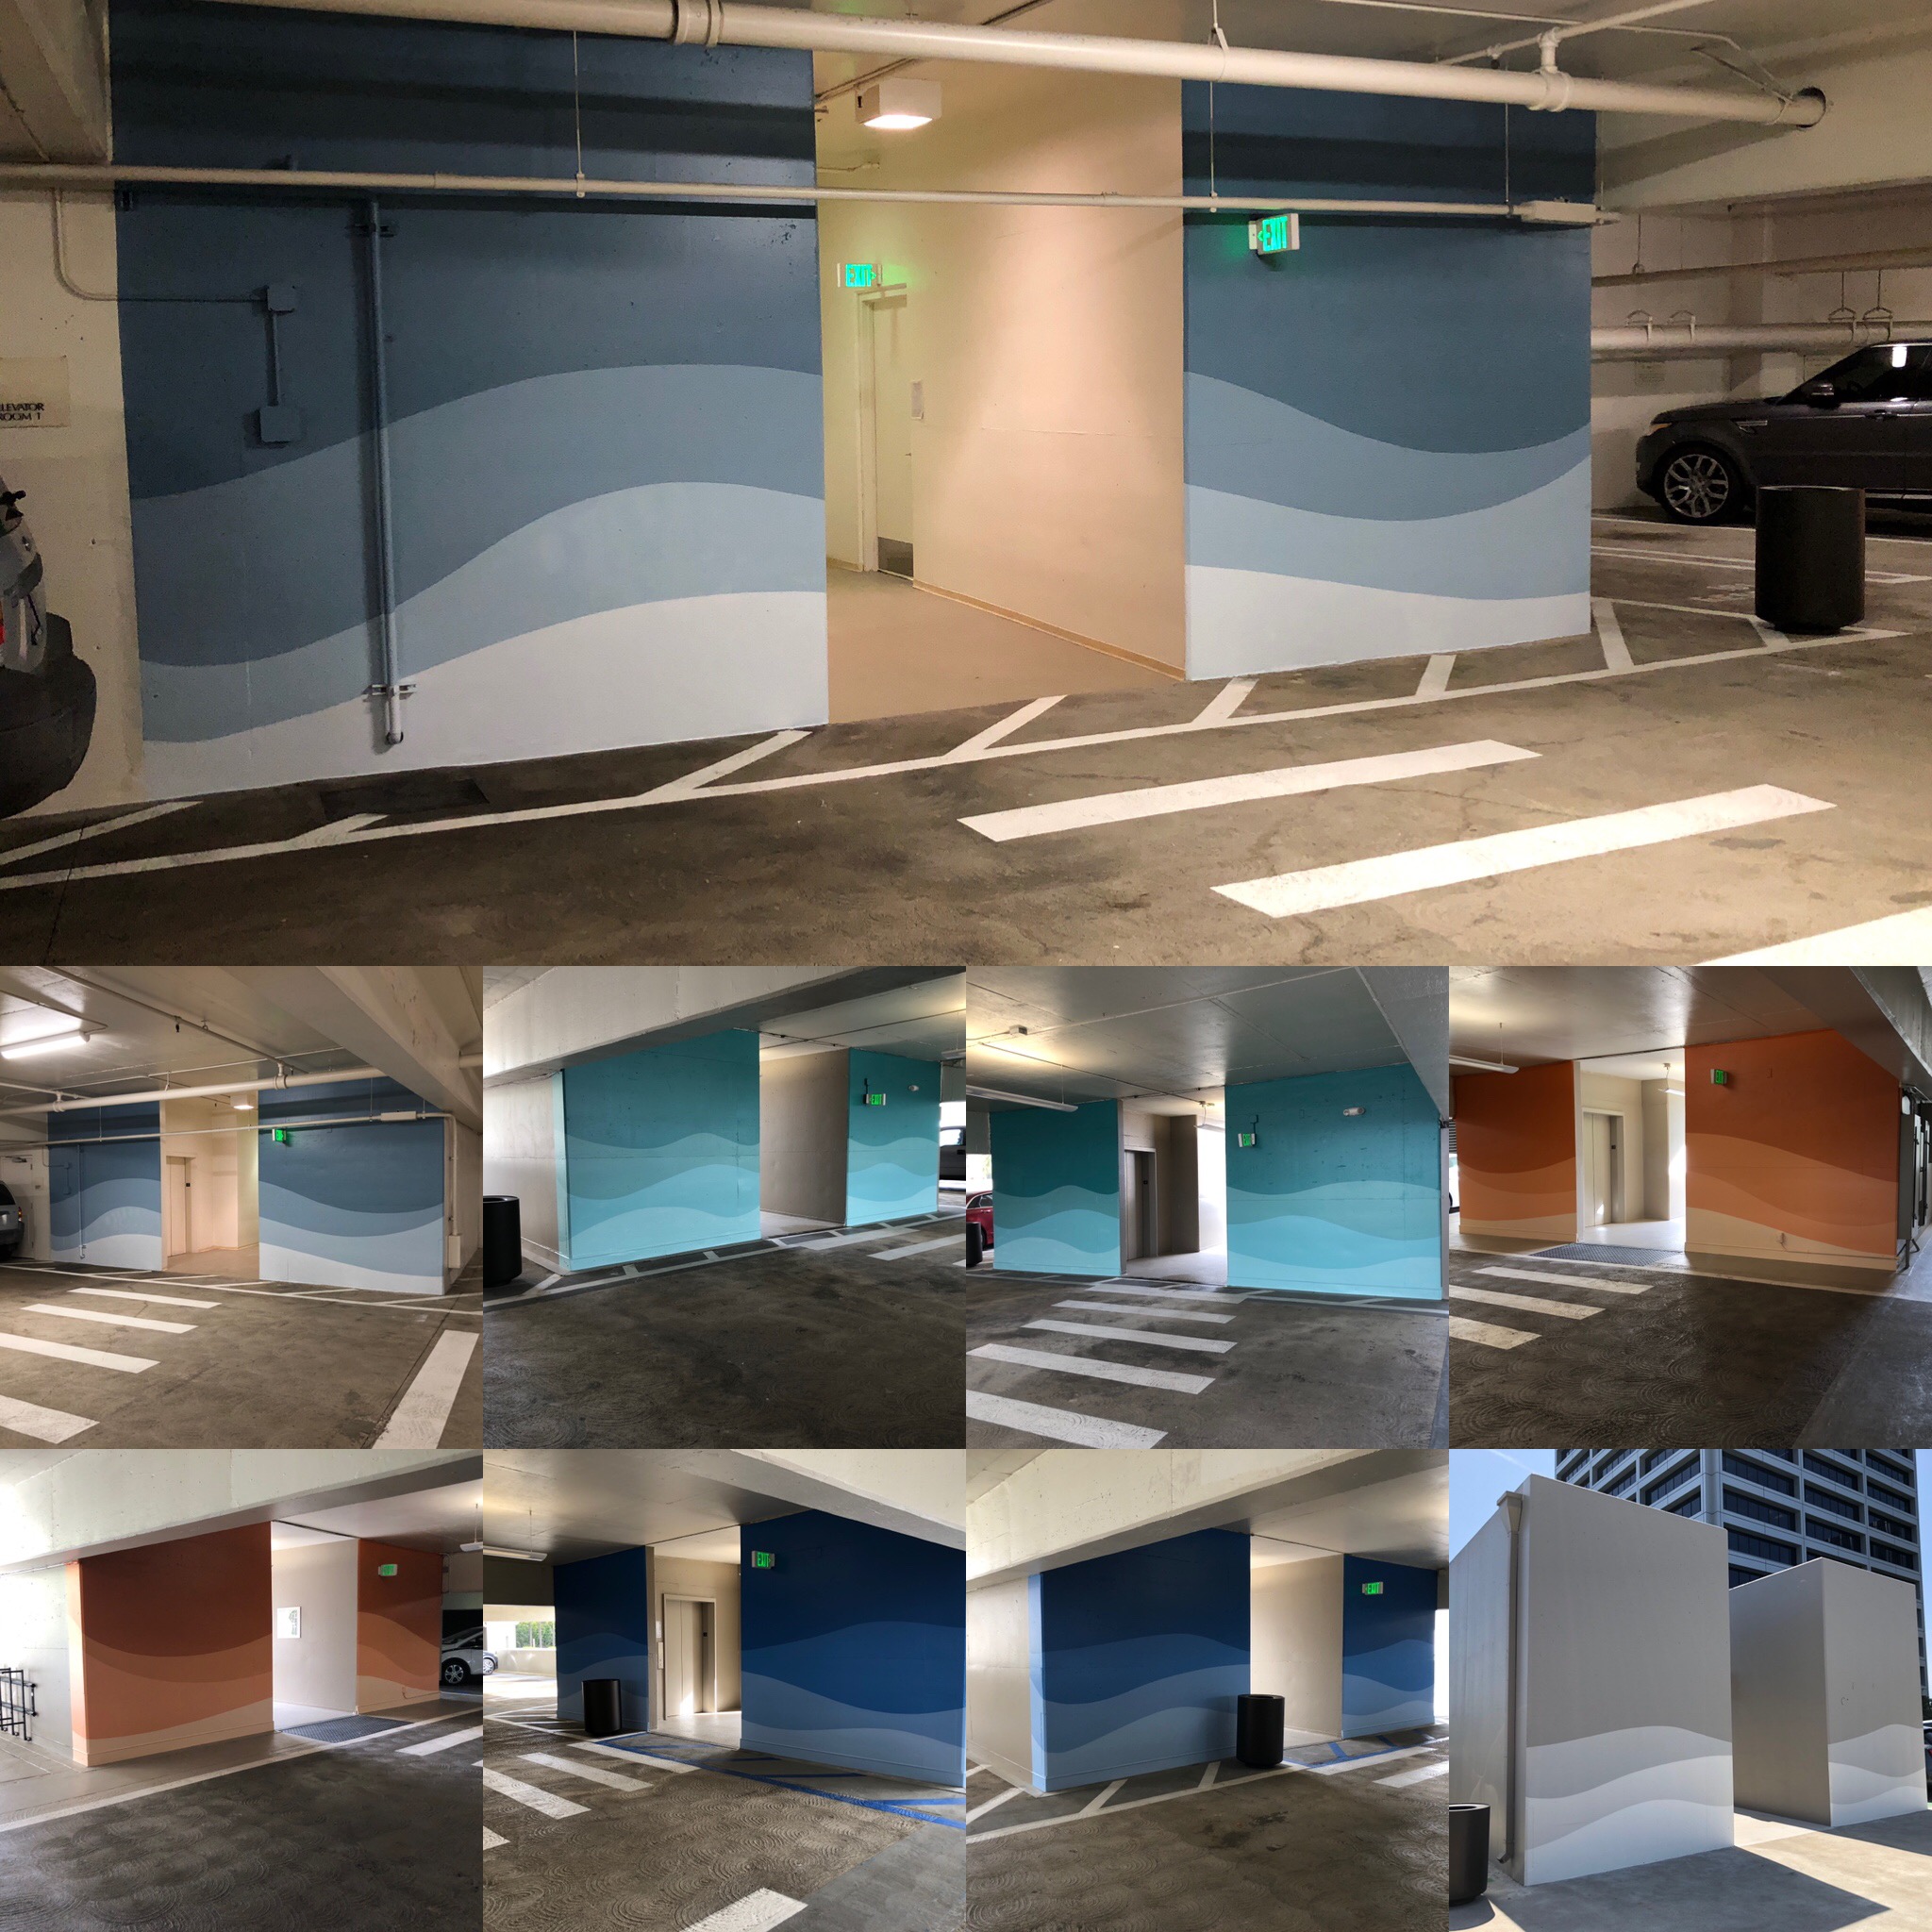 Hand painted graphics for parking structure way finding